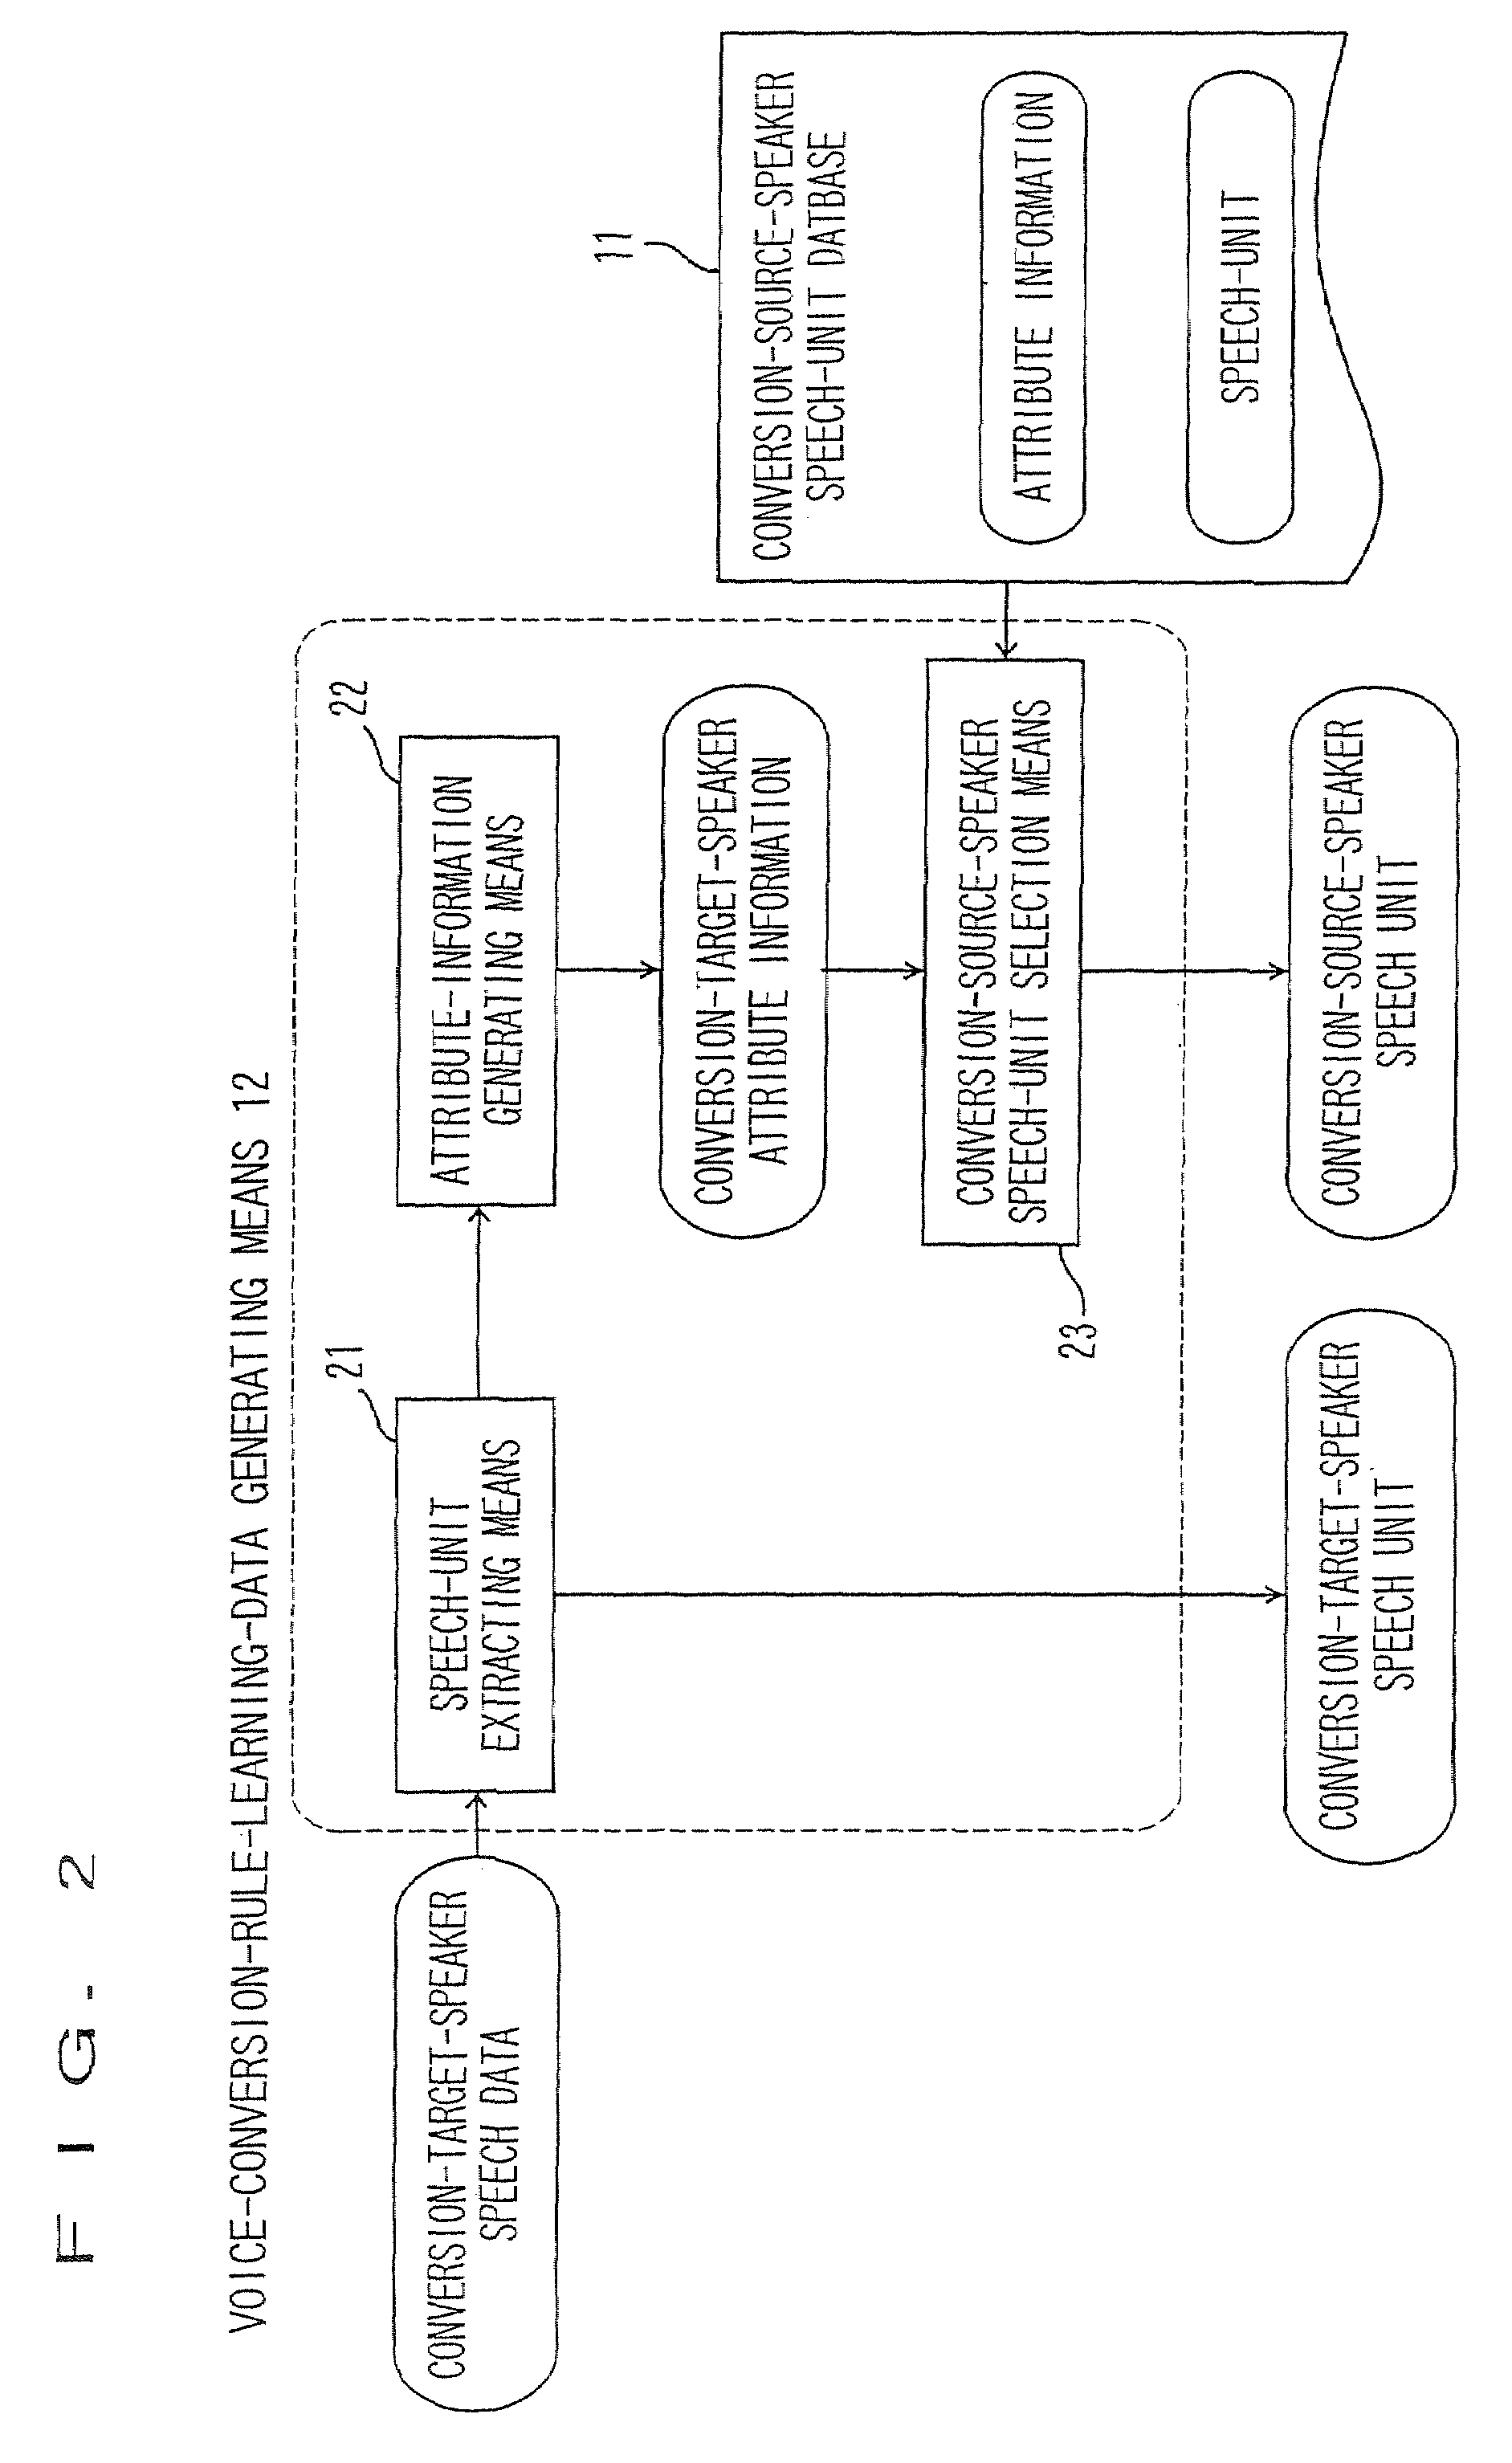 Apparatus and method for voice conversion using attribute information